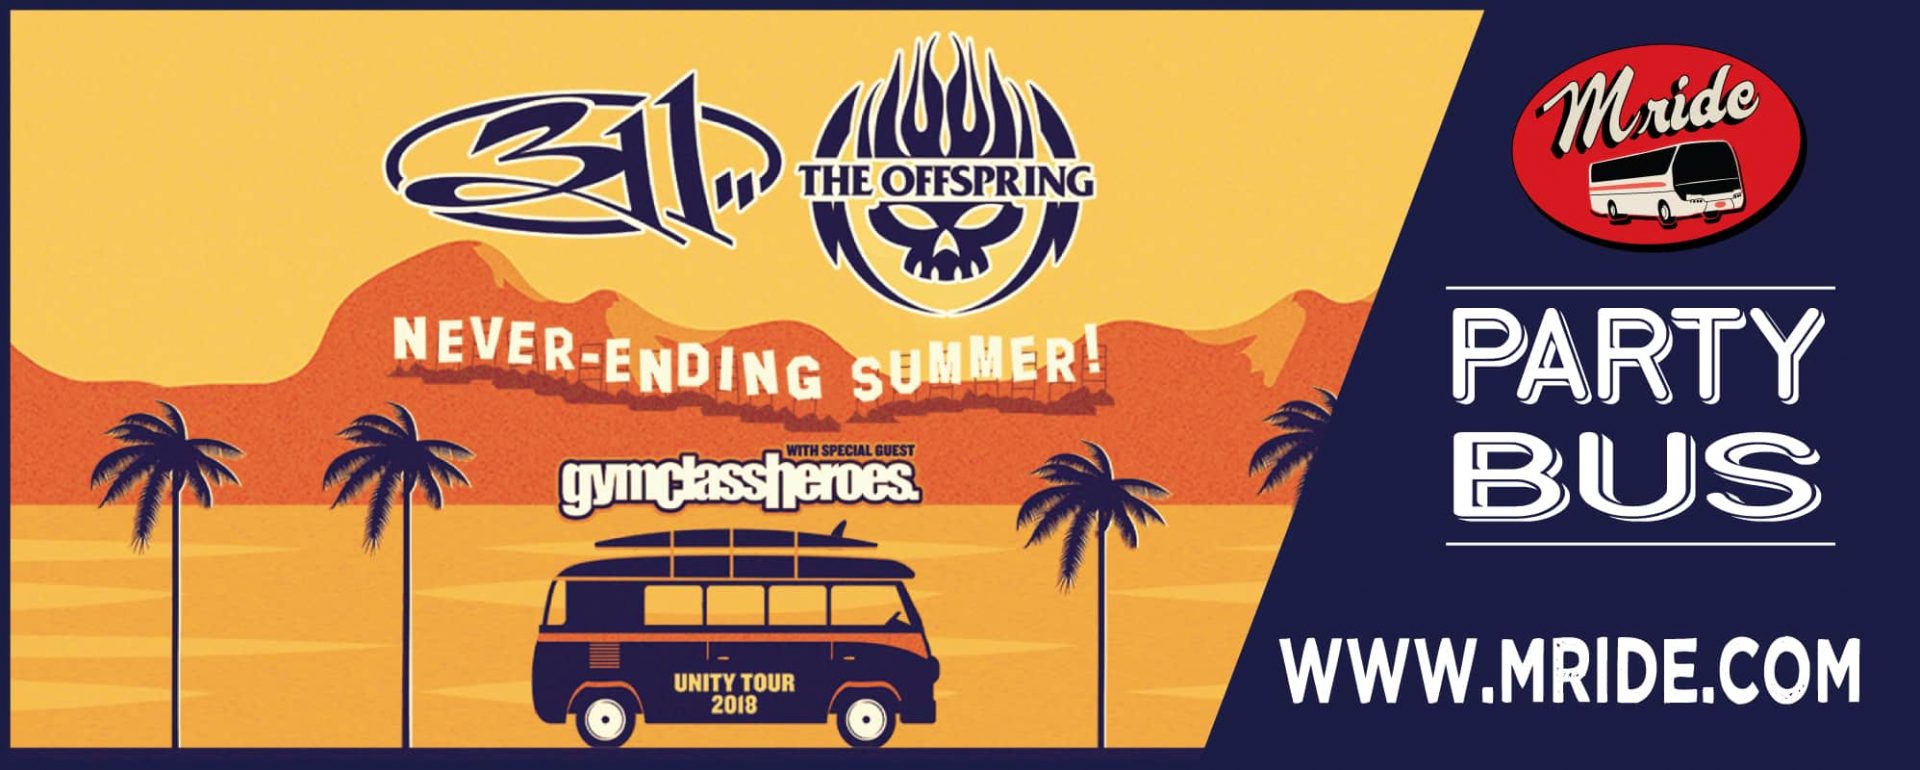 311 and The Offspring Concert Party Bus